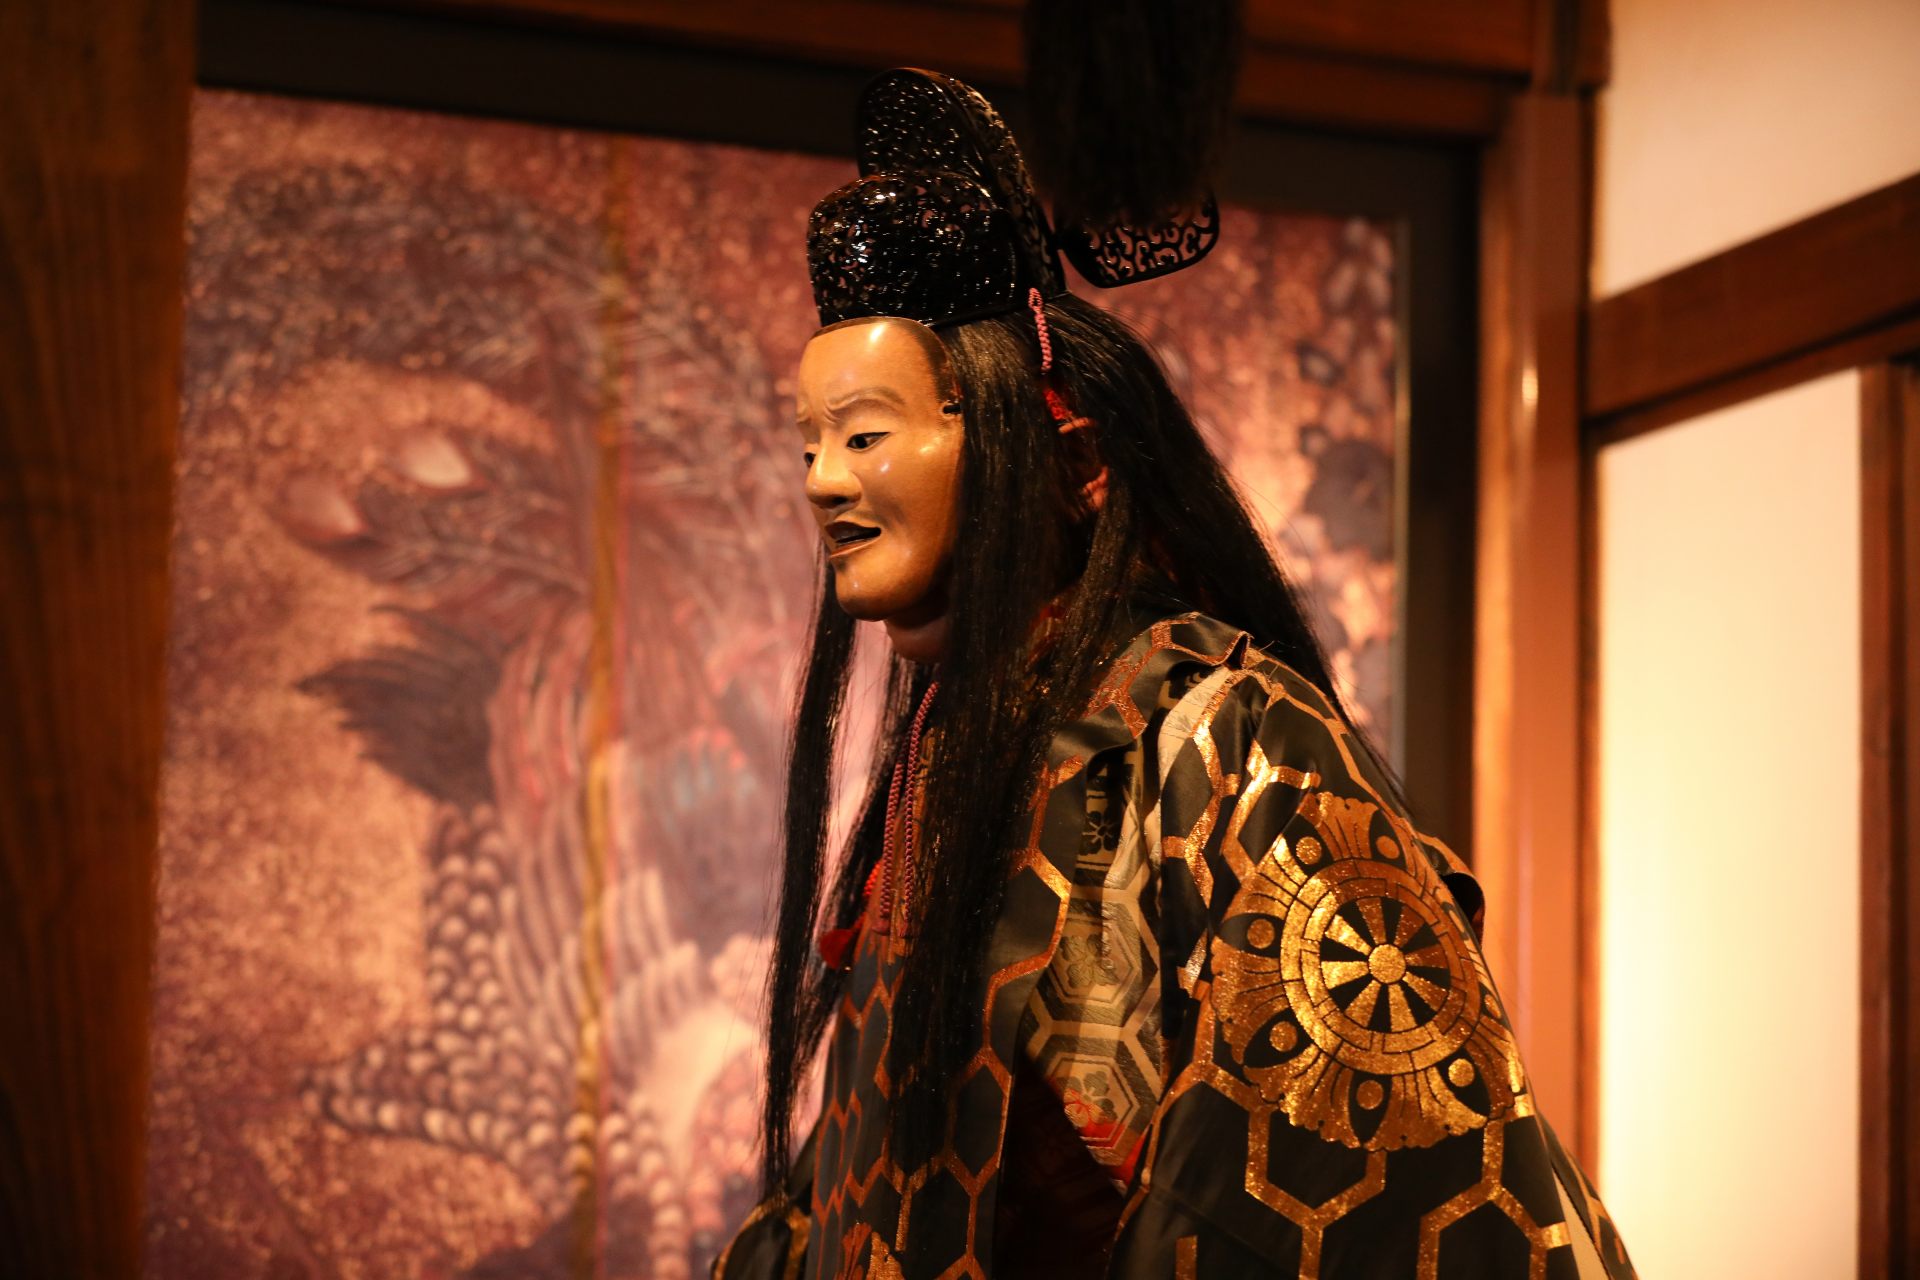 The appearance of the performer in mask and costume is a thing of transcendent beauty.